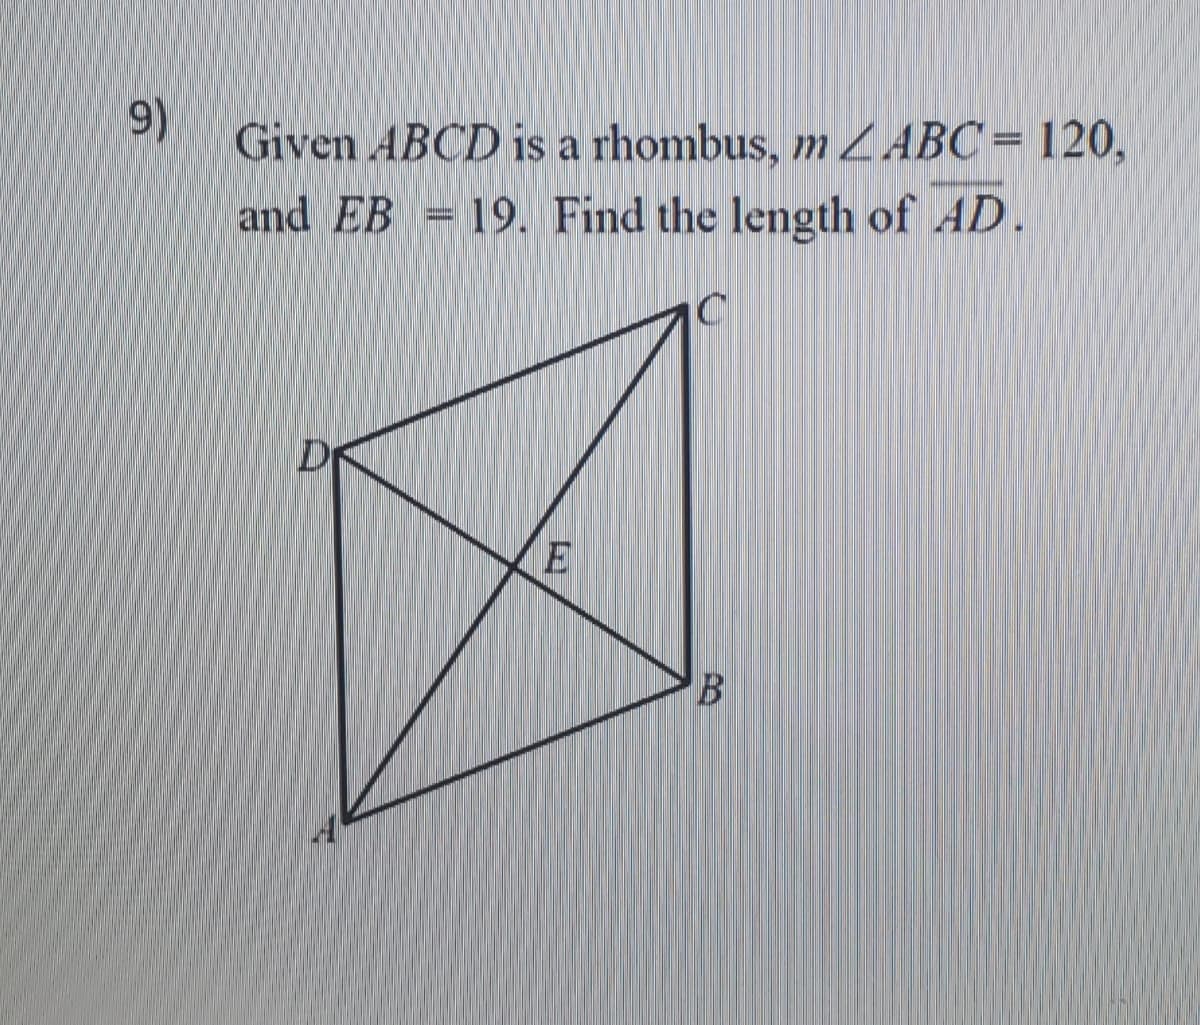 Given ABCD is a rhombus, m ZABC= 120,
and EB = 19. Find the length of AD.
D
